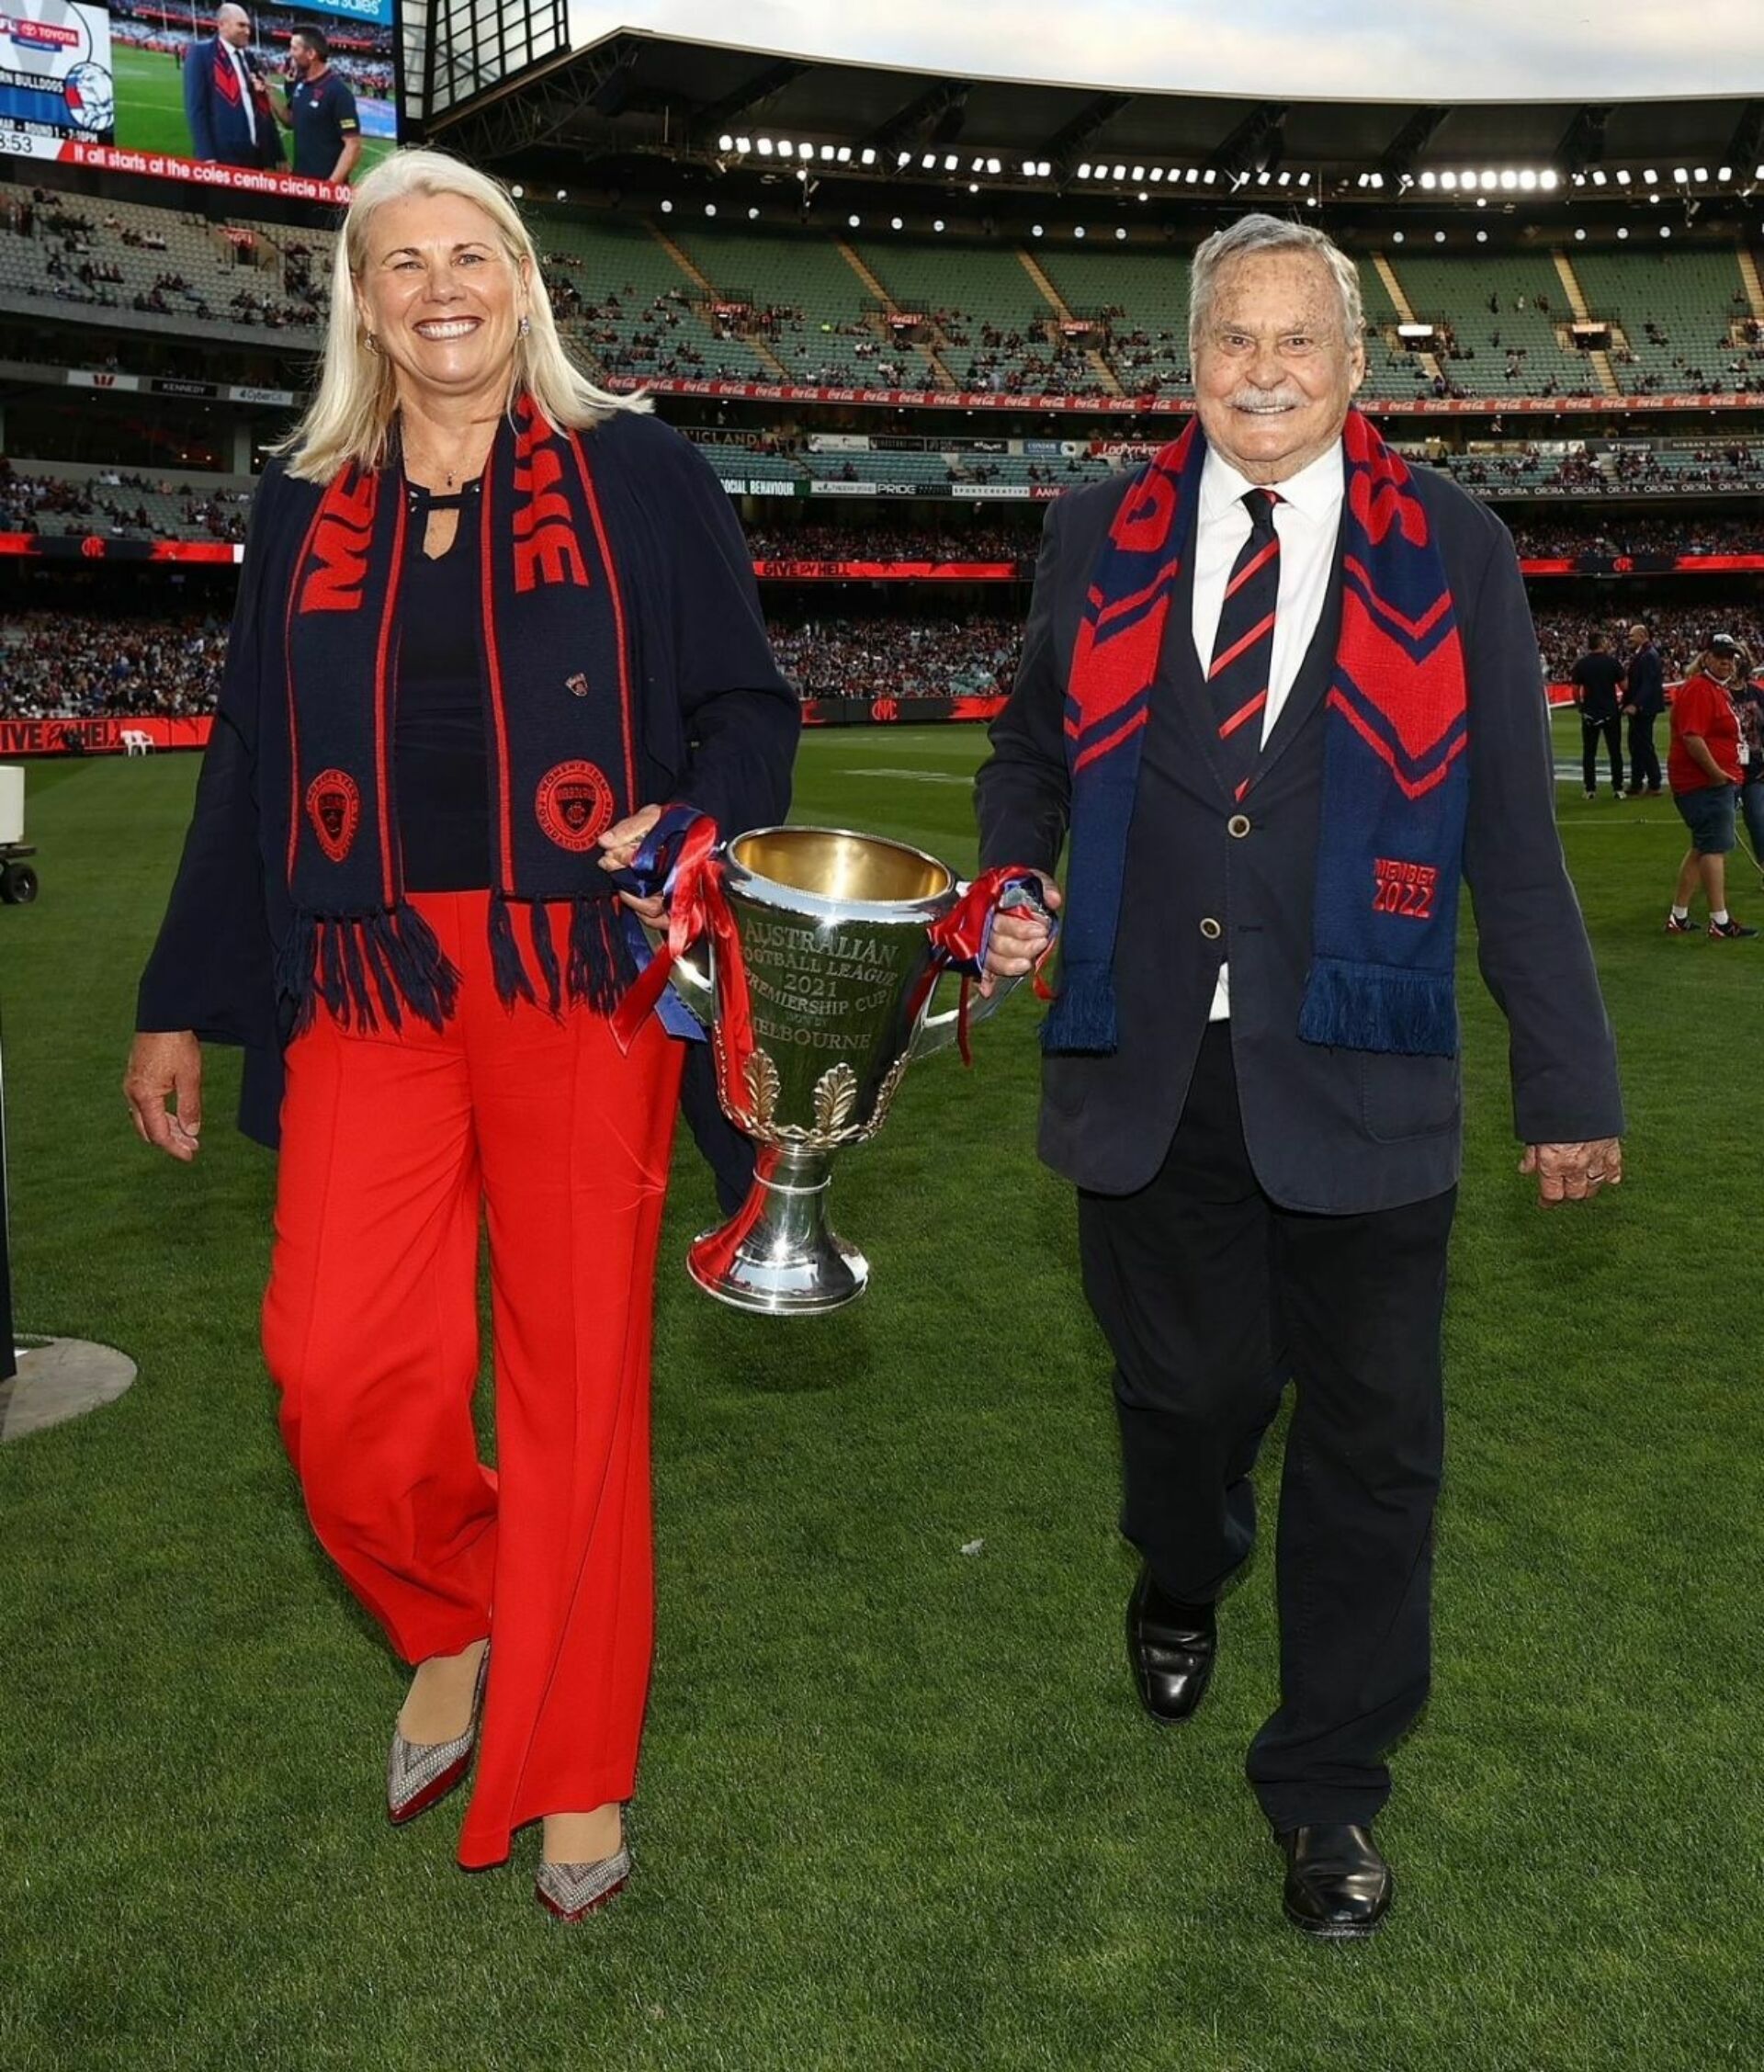 Key updates barassi state funeral ron barassi and kate roffey